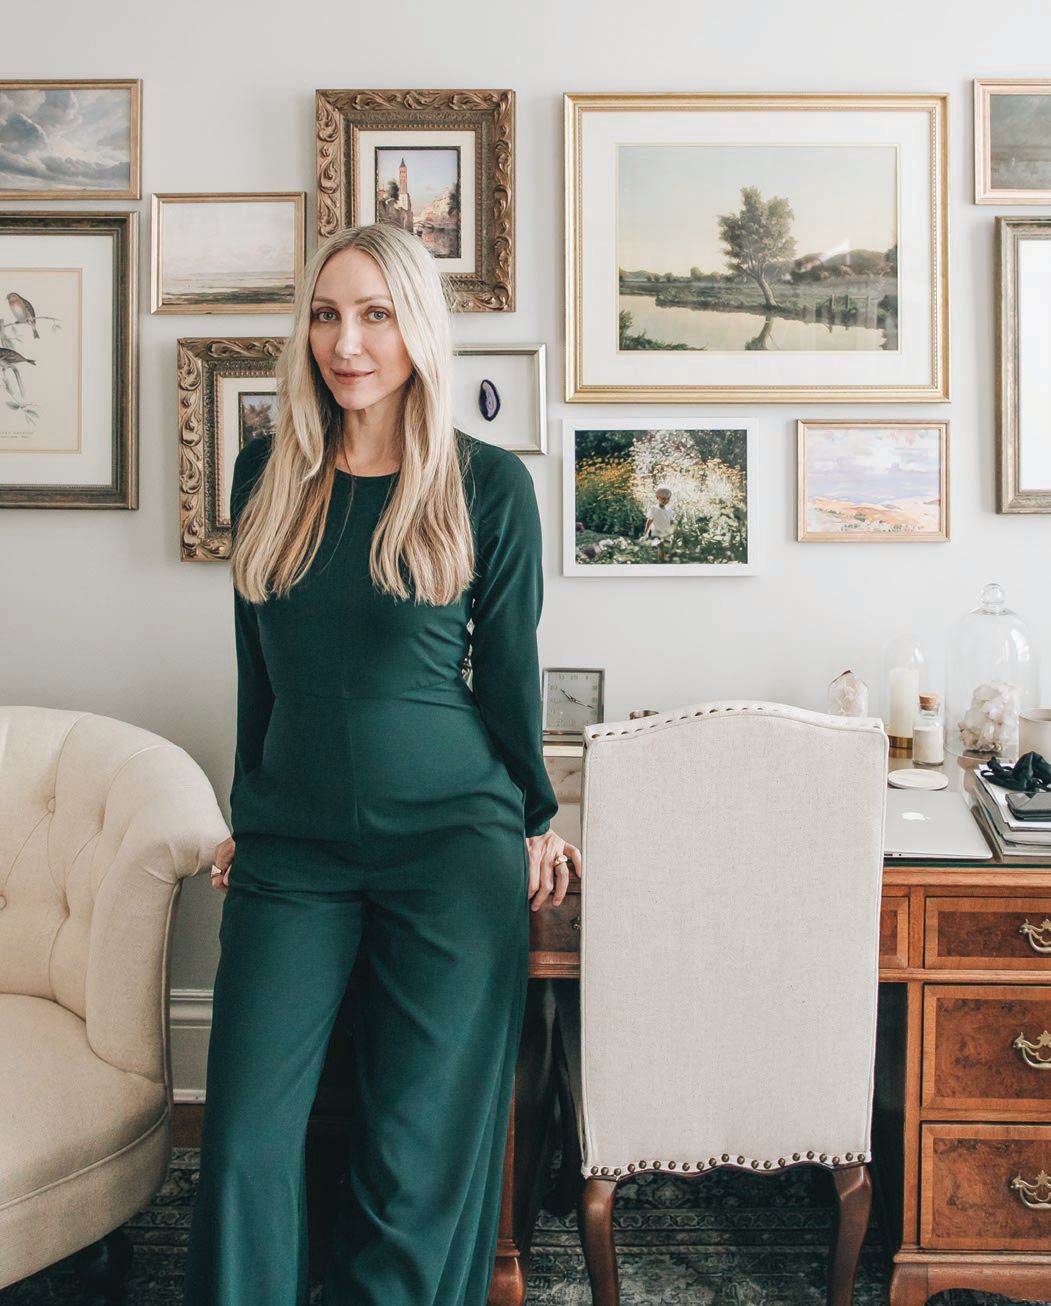 Adrienne Shostak, owner of Bespoke Aesthetics. PHOTO: BY CECILE STORM PICTURES